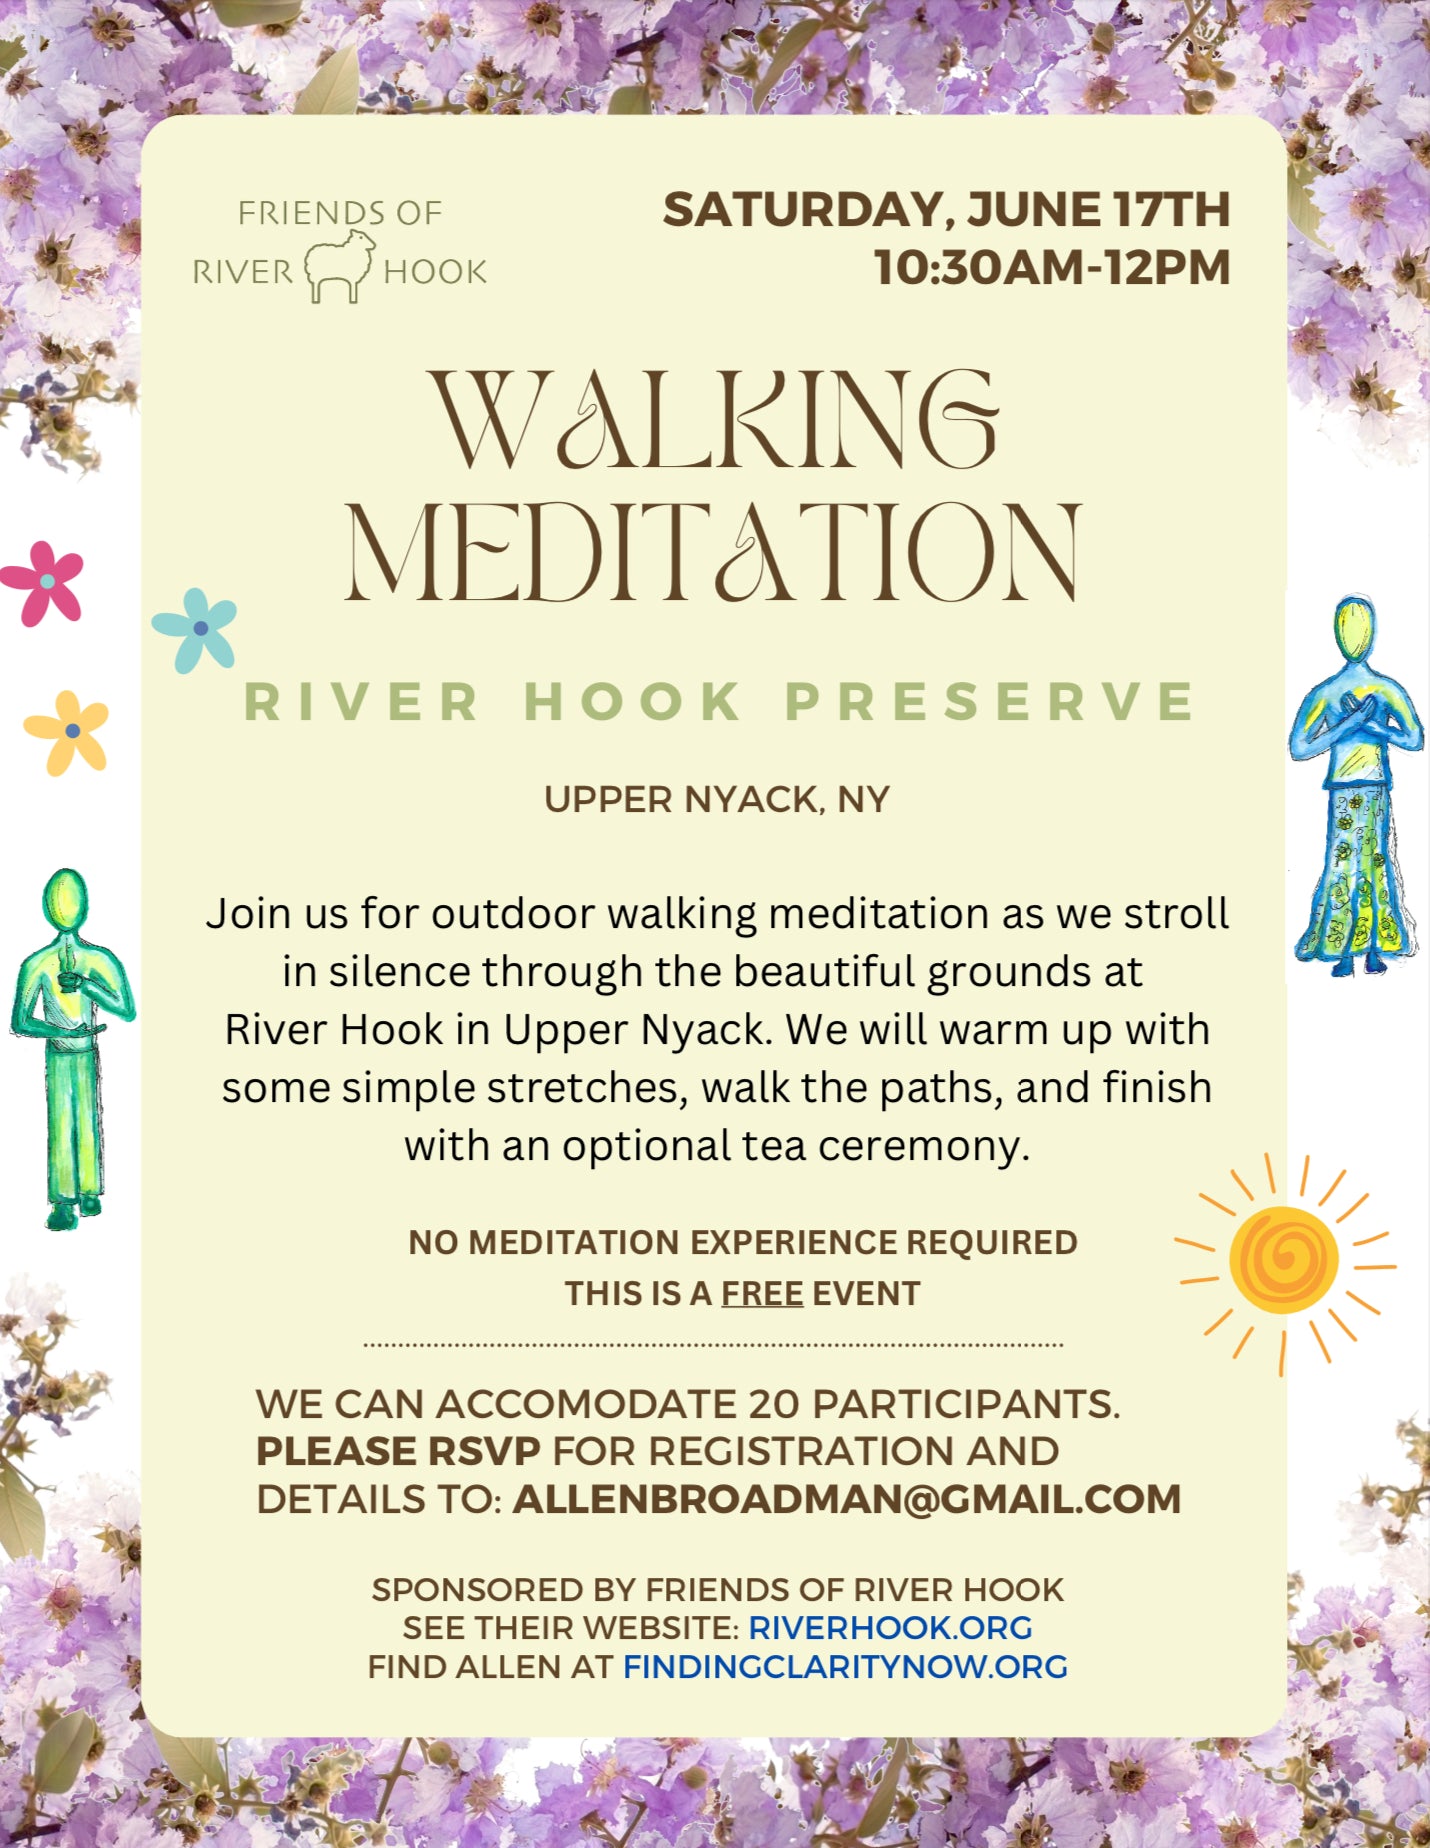 We are having another Walking Meditation event at River Hook.  RSVP soon.